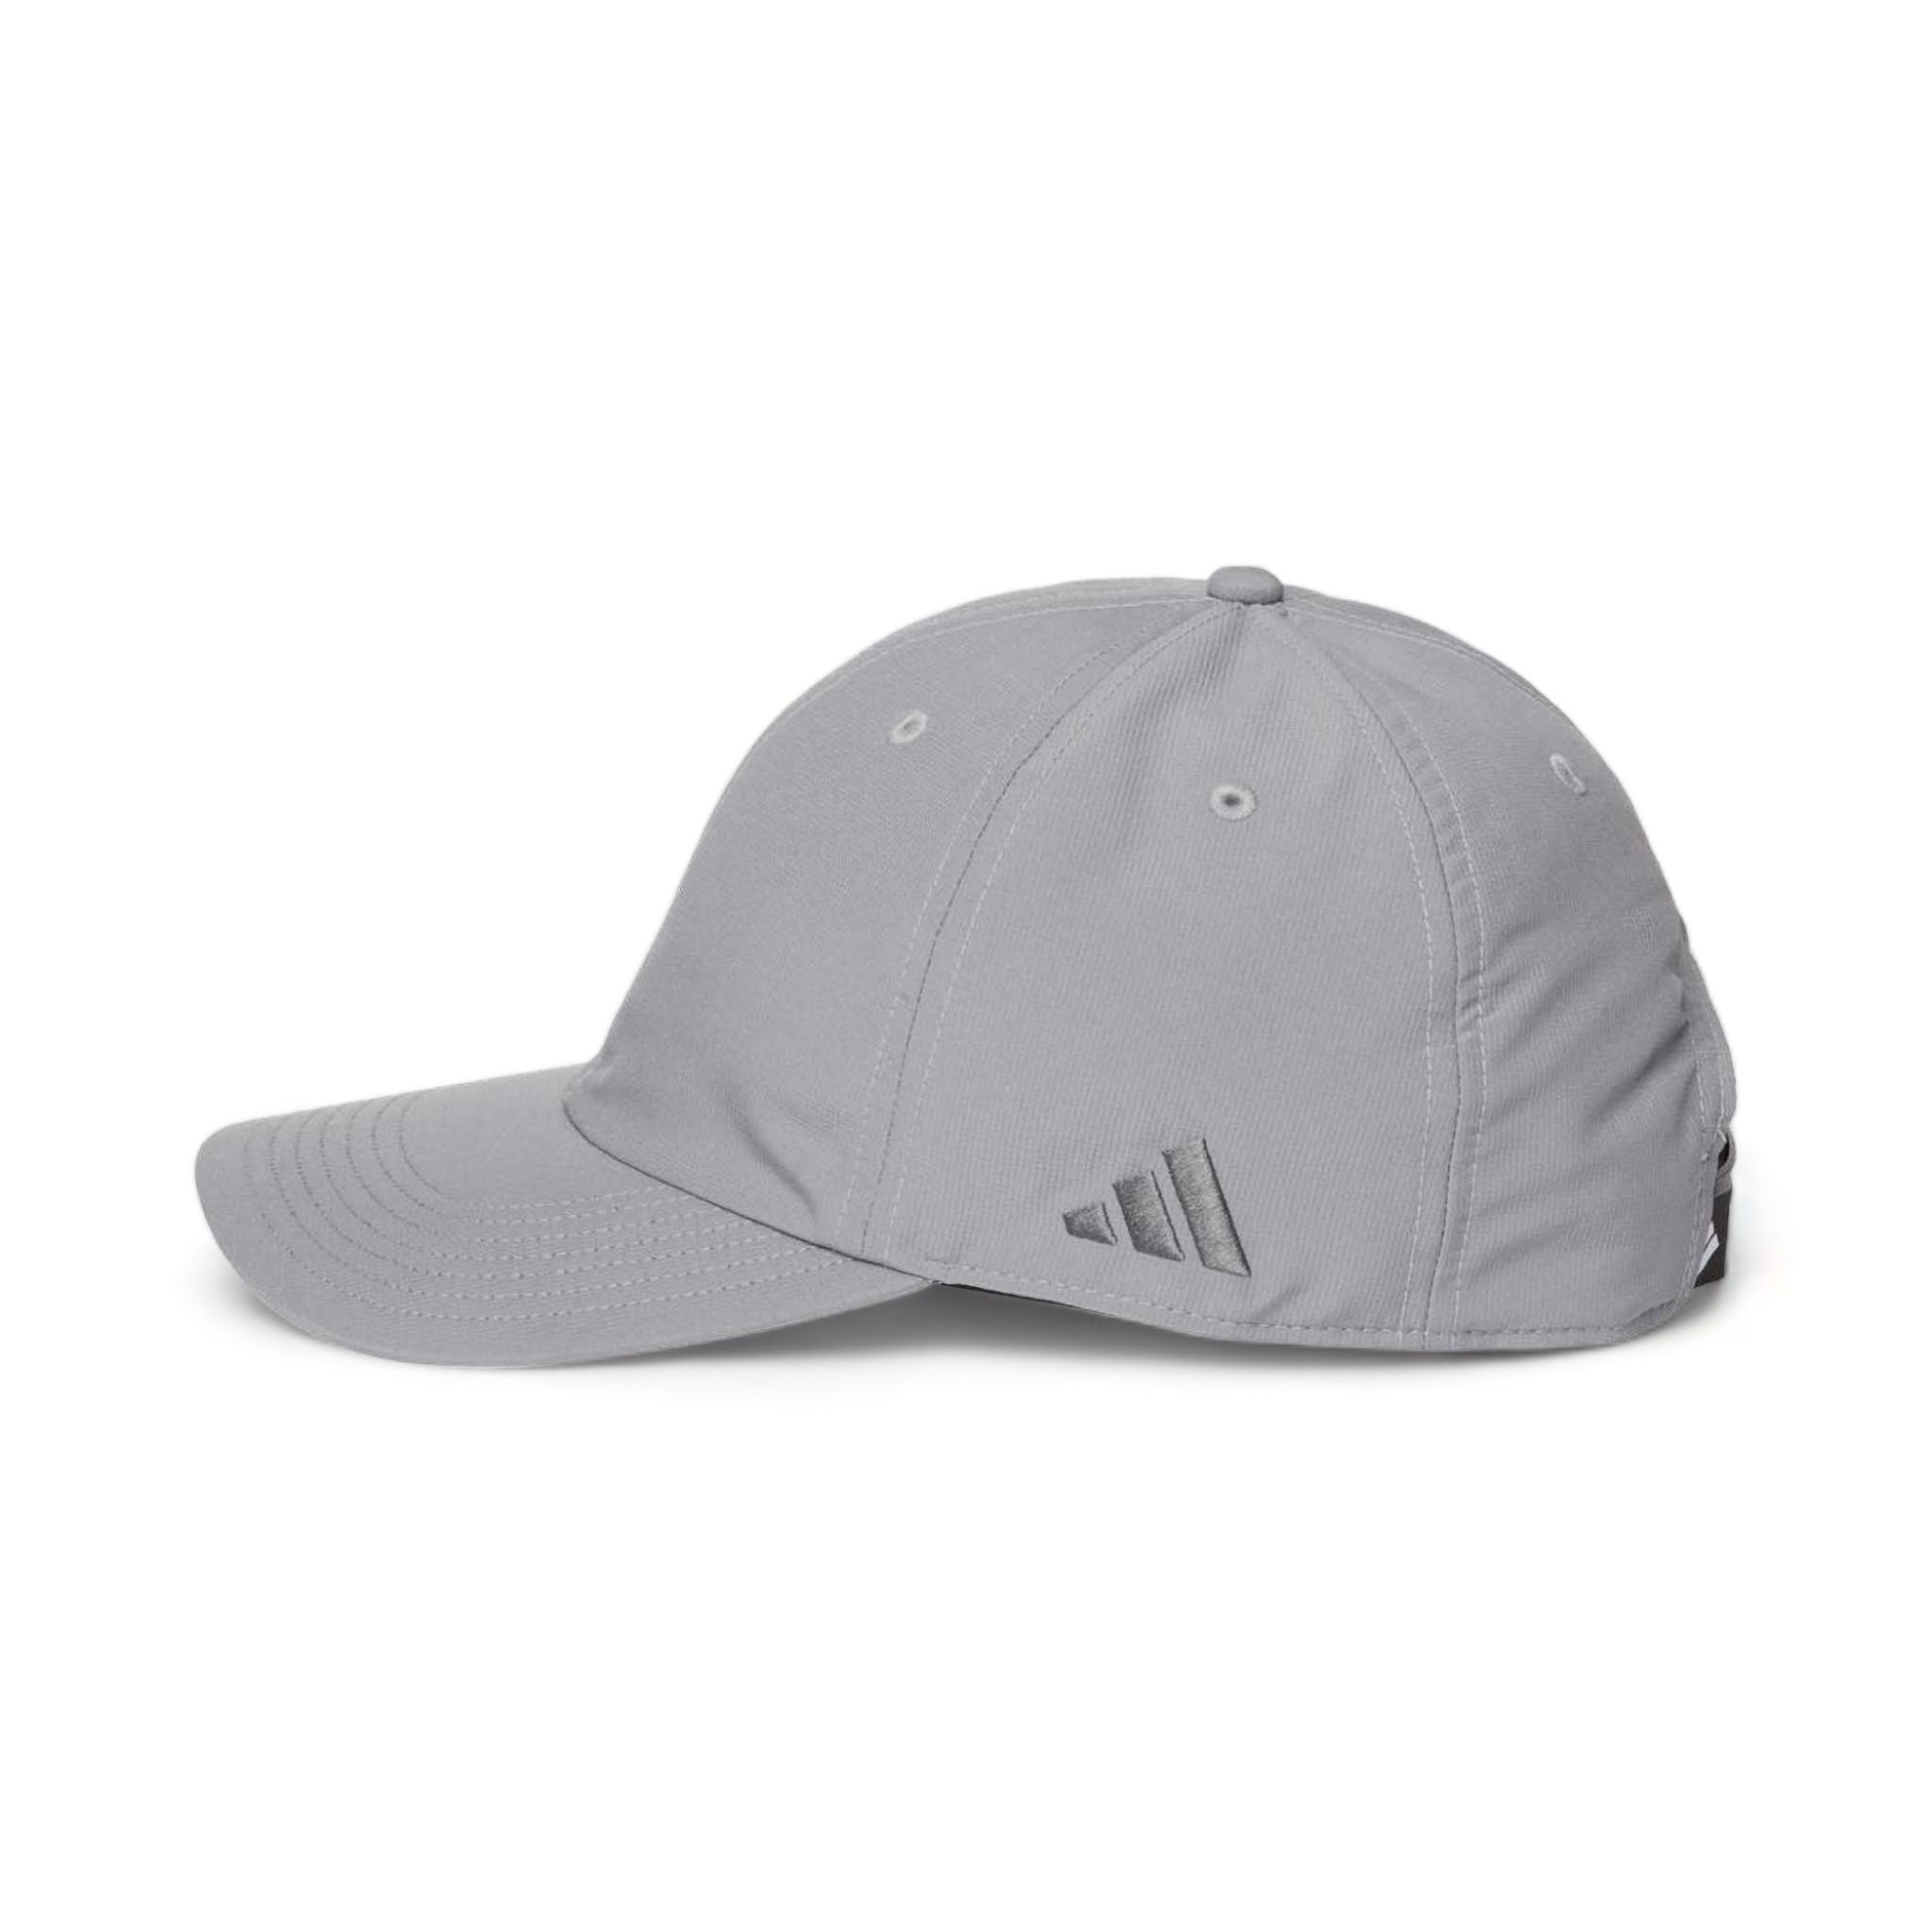 Side view of Adidas A600S custom hat in grey three